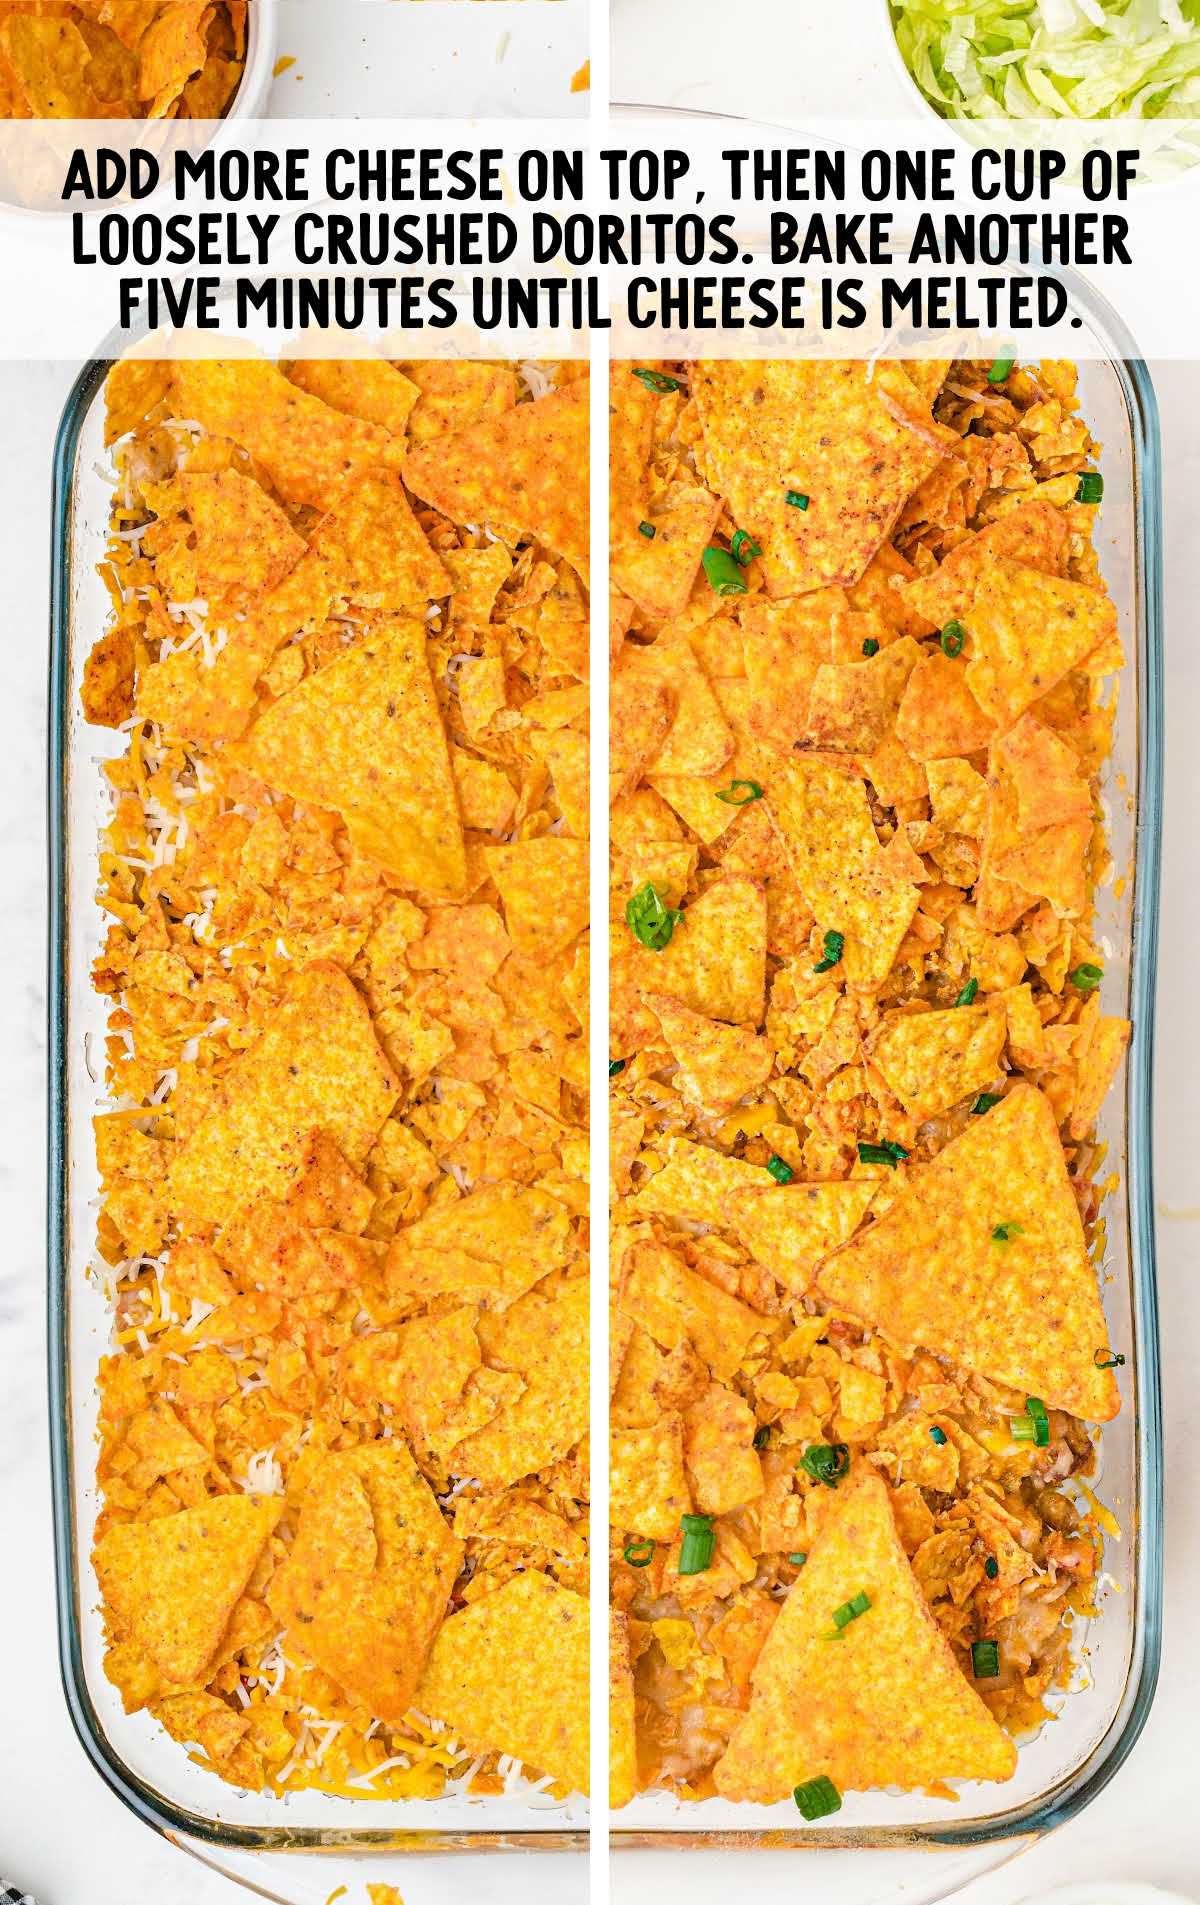 cheese and Doritos placed on top of the ingredients in the baking dish